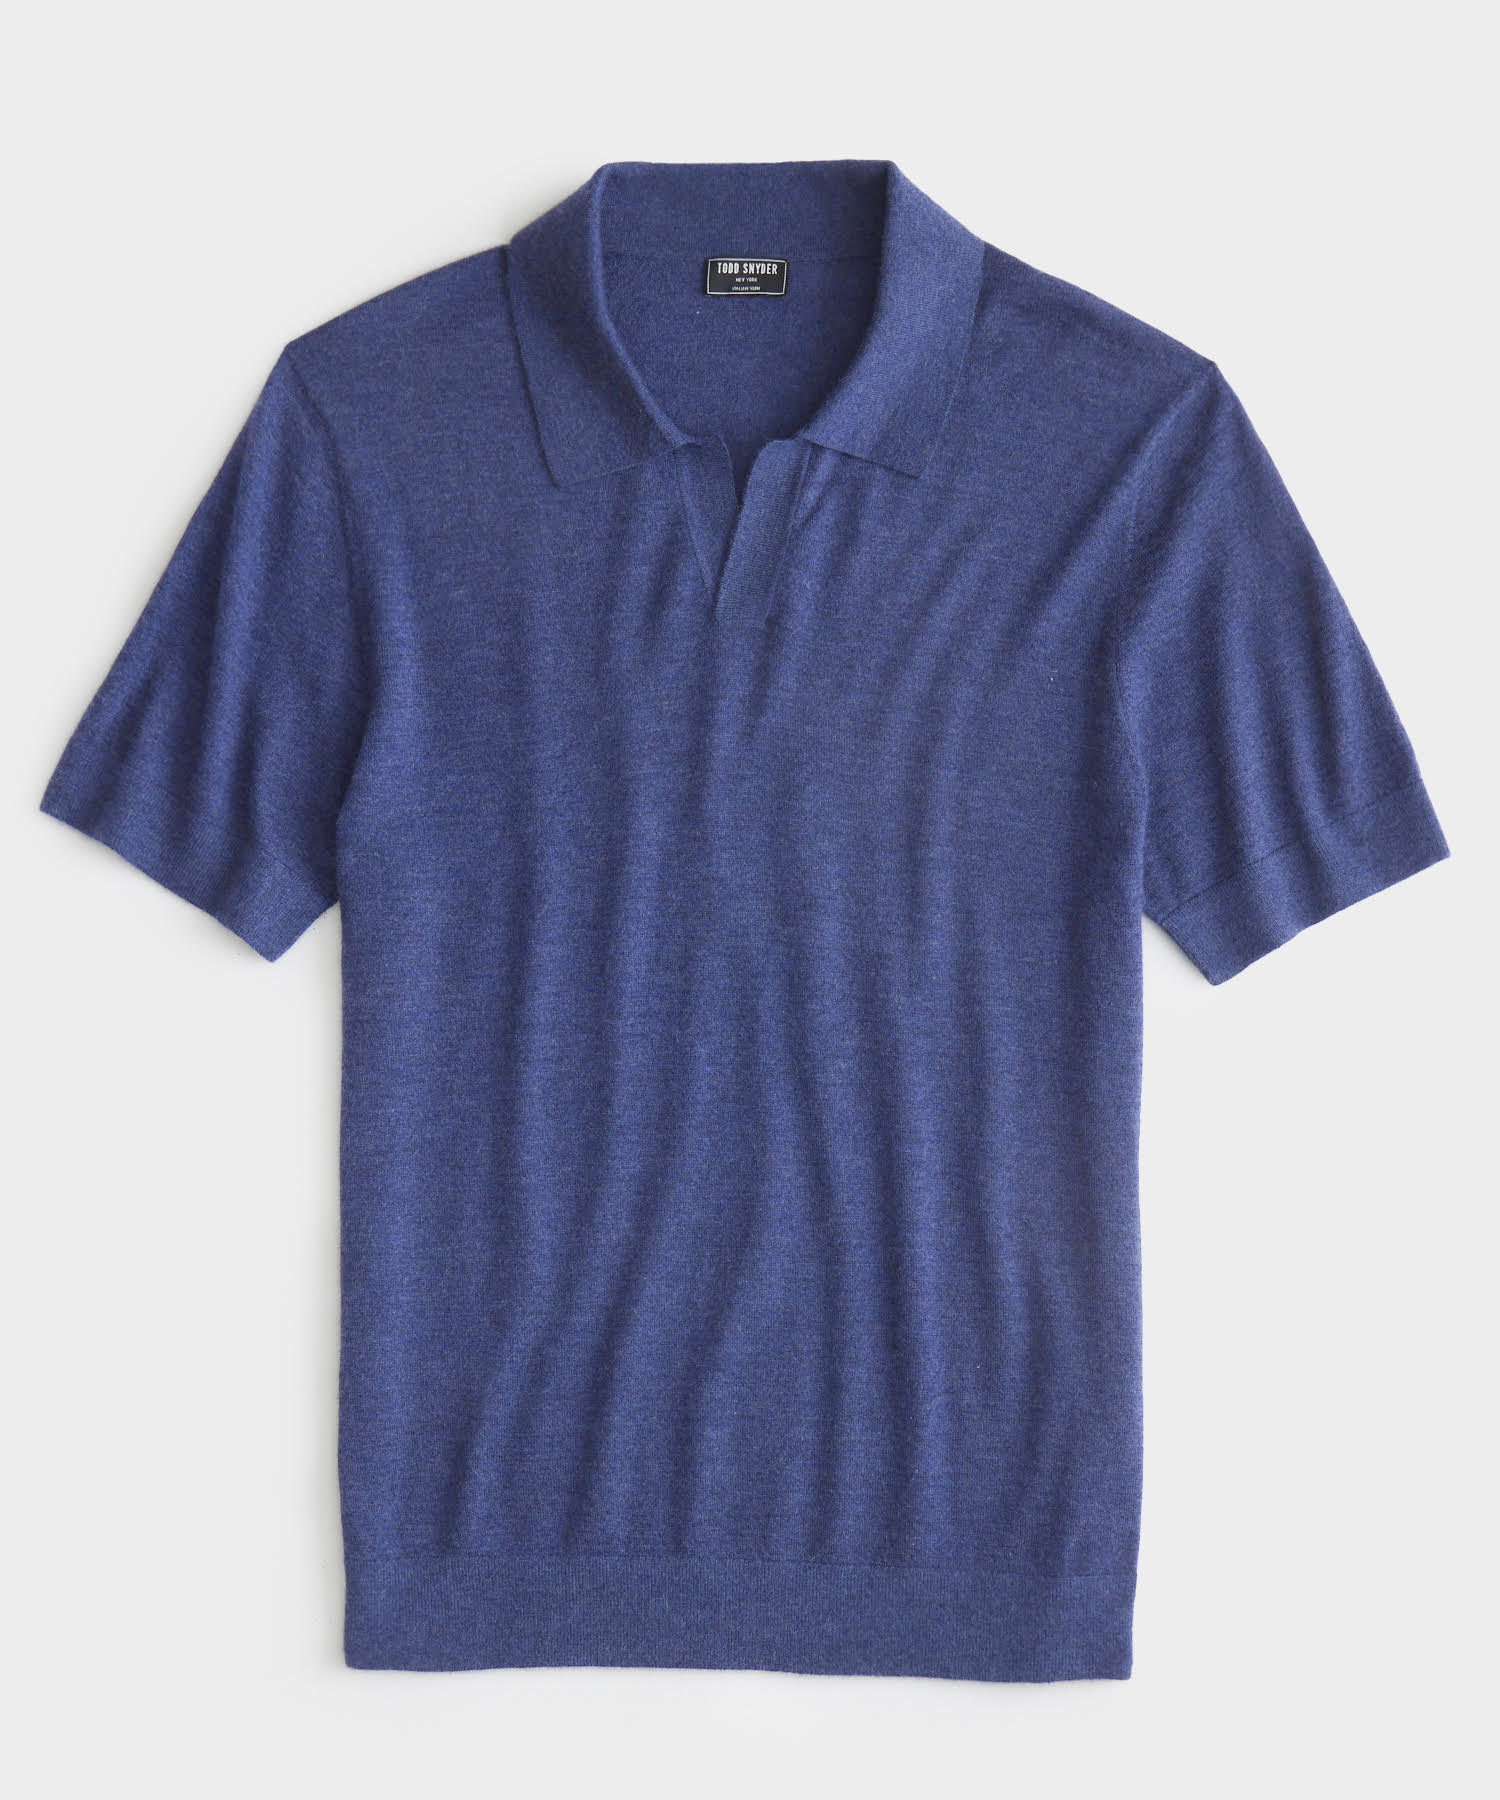 Lightweight Cashmere Montauk Polo in Weathered Blue